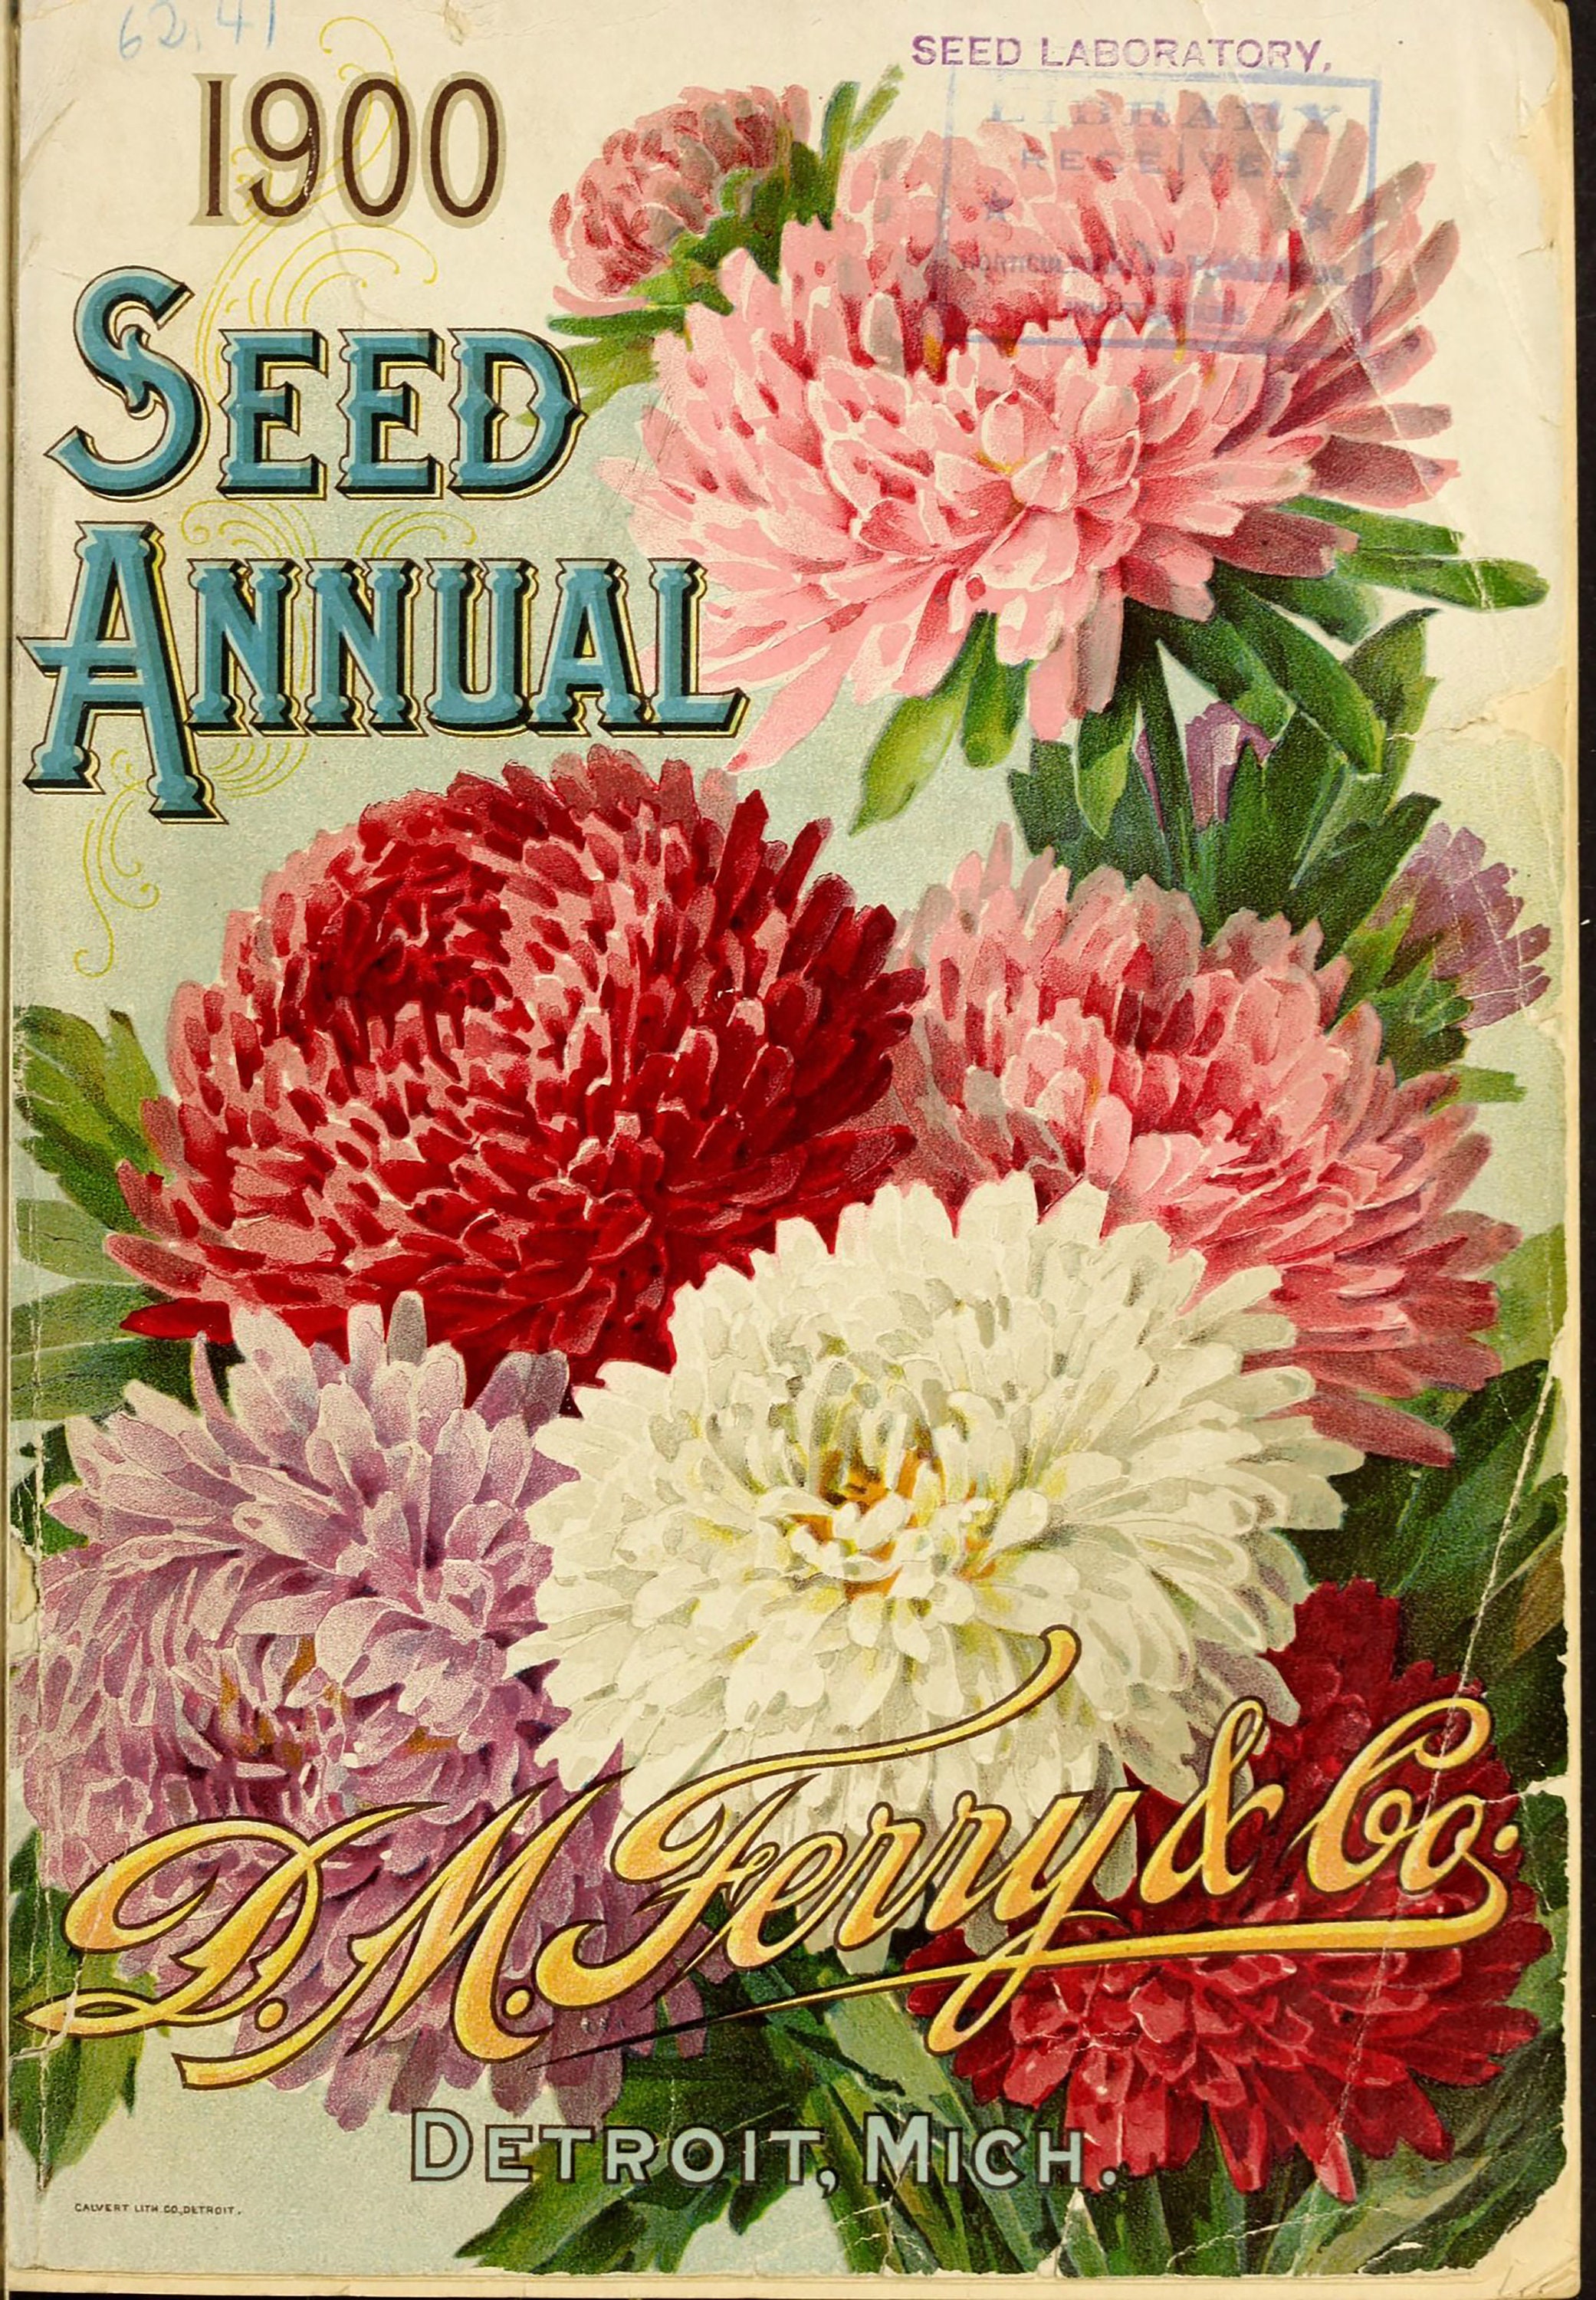 Antique Flower Seed Packets, Sticker Sheet, Vintage Seed Packs